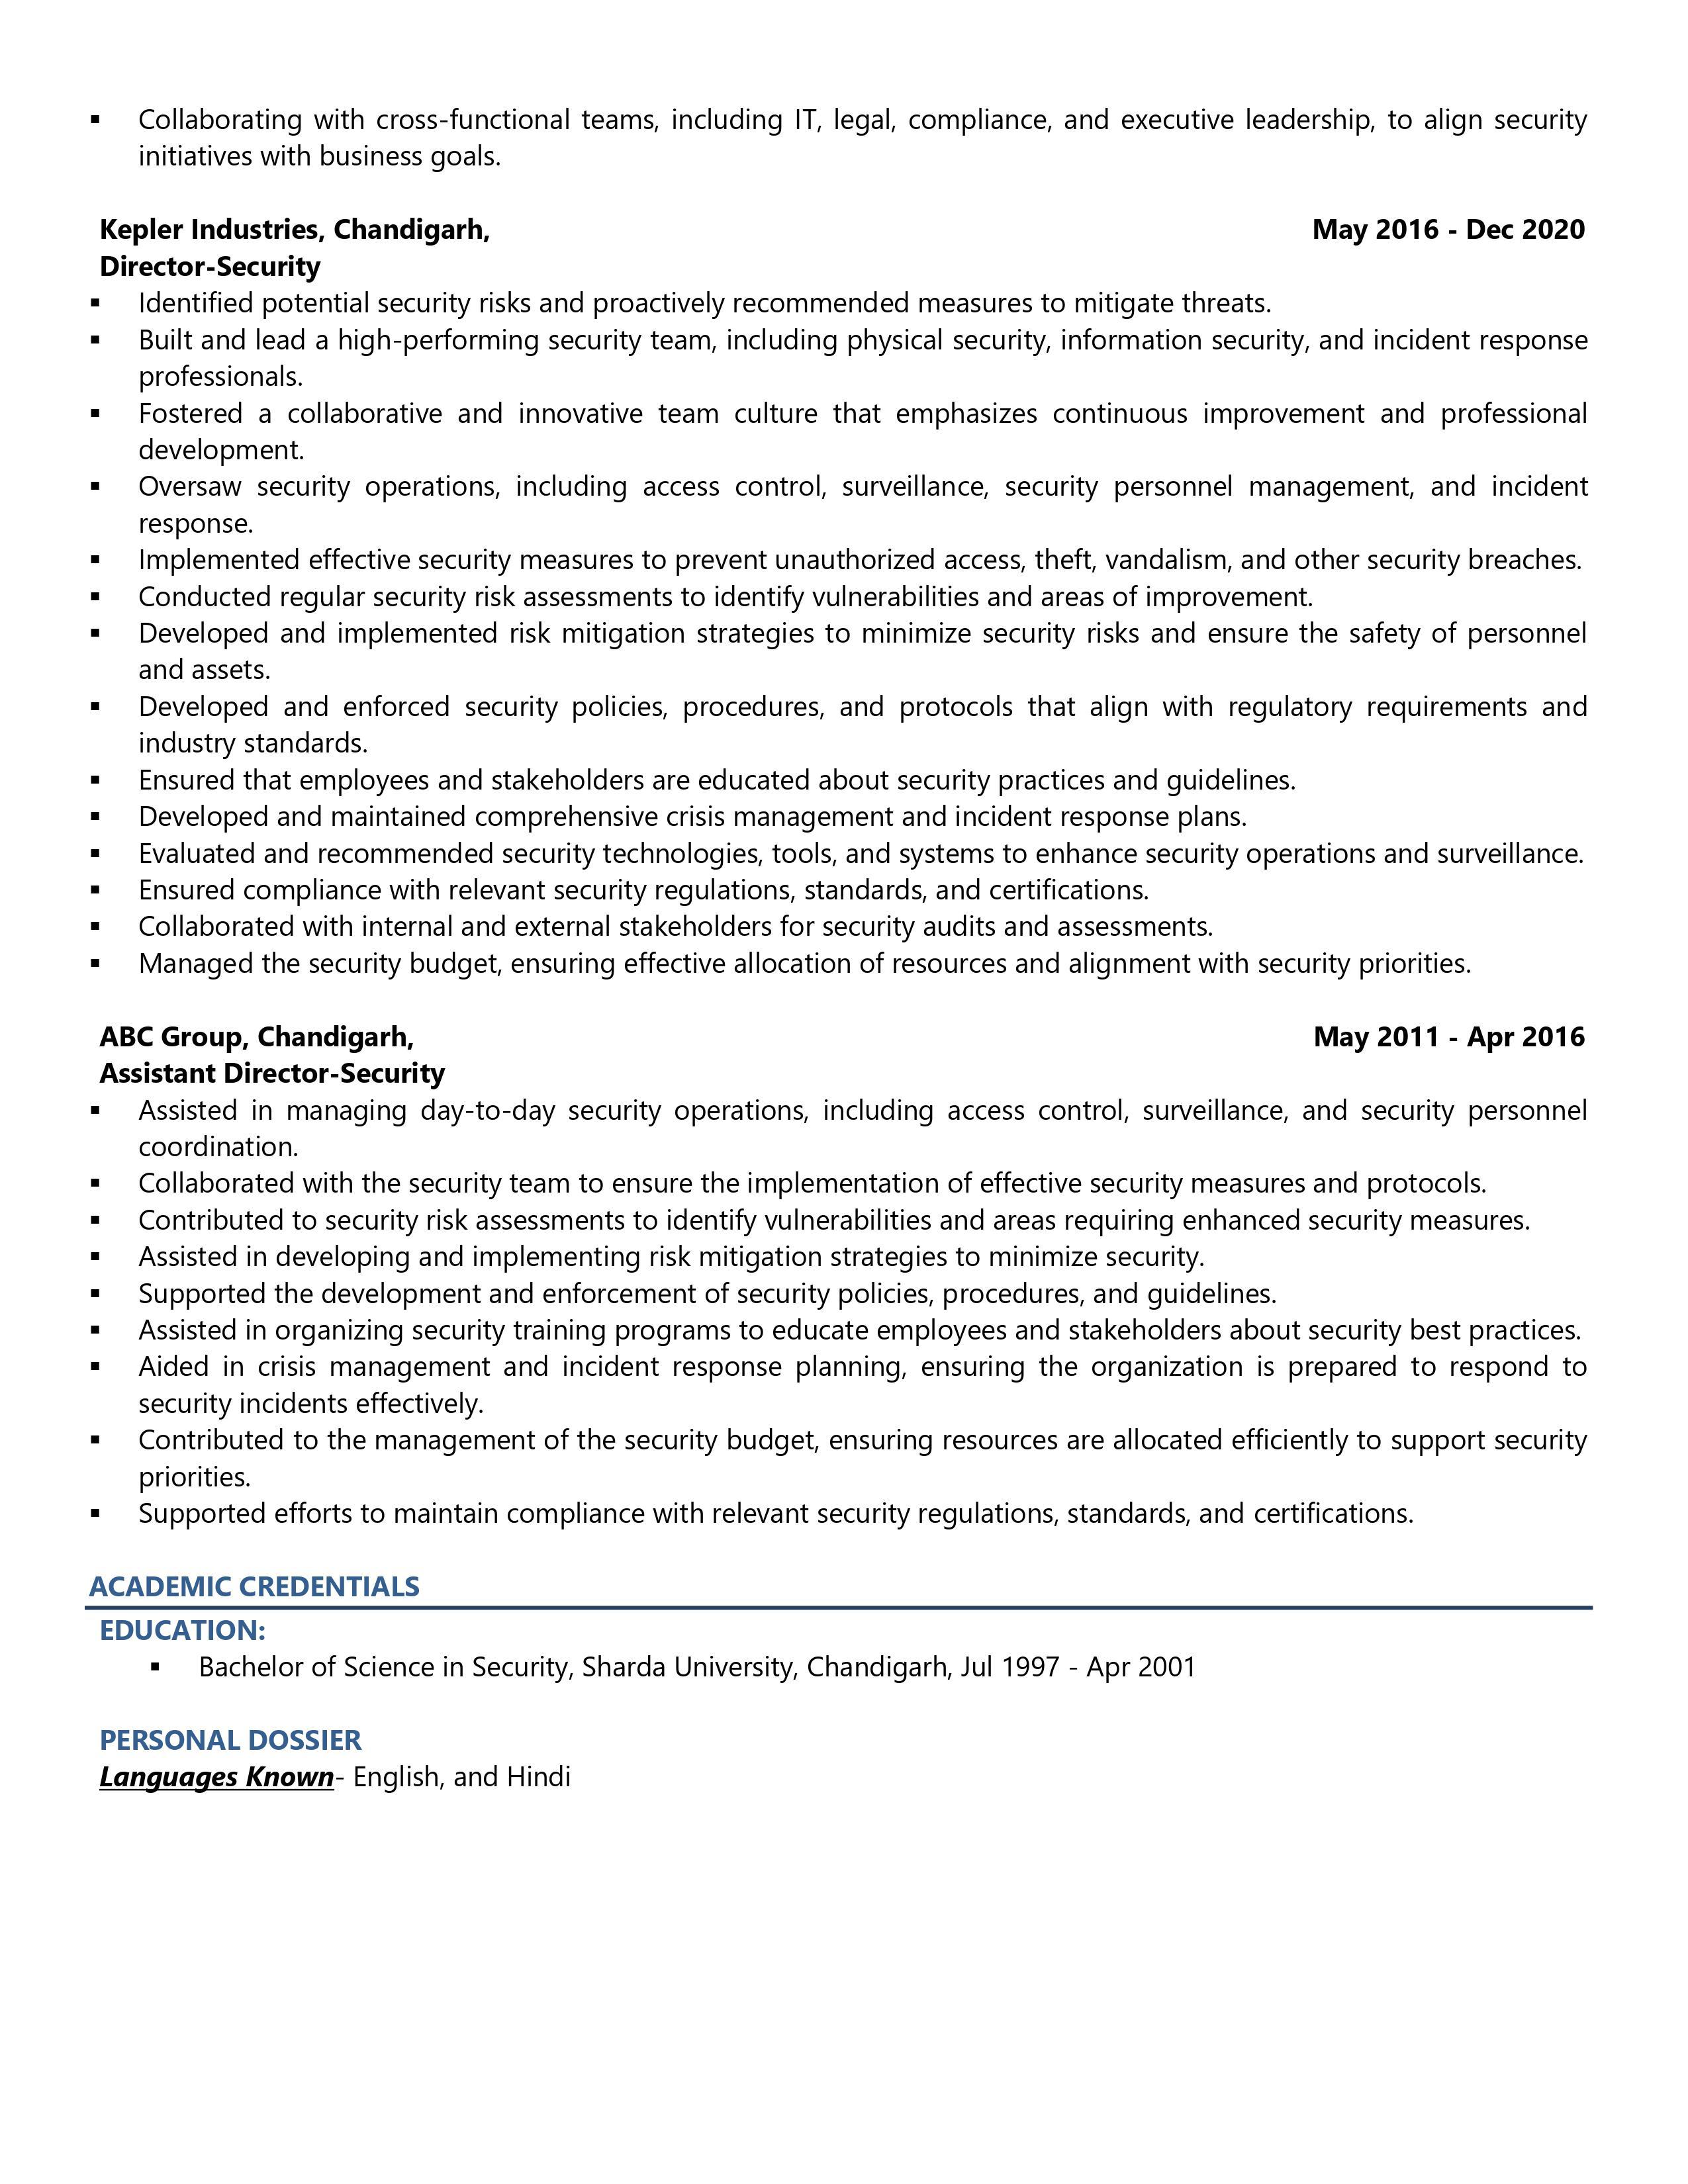 Chief Security Officer - Resume Example & Template